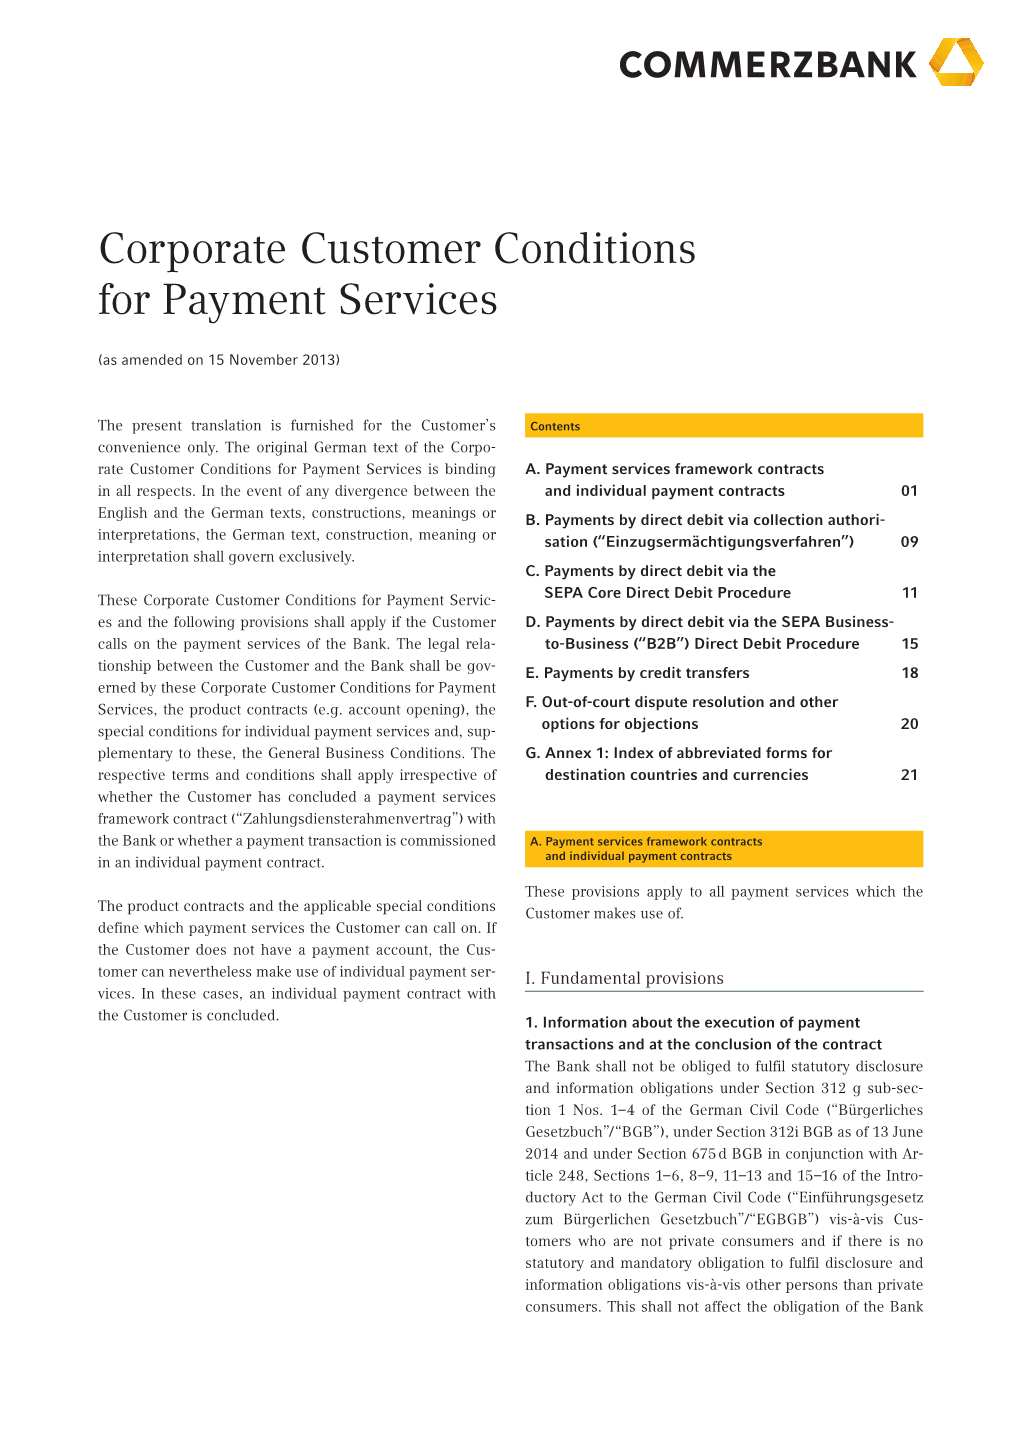 Corporate Customer Conditions for Payment Services